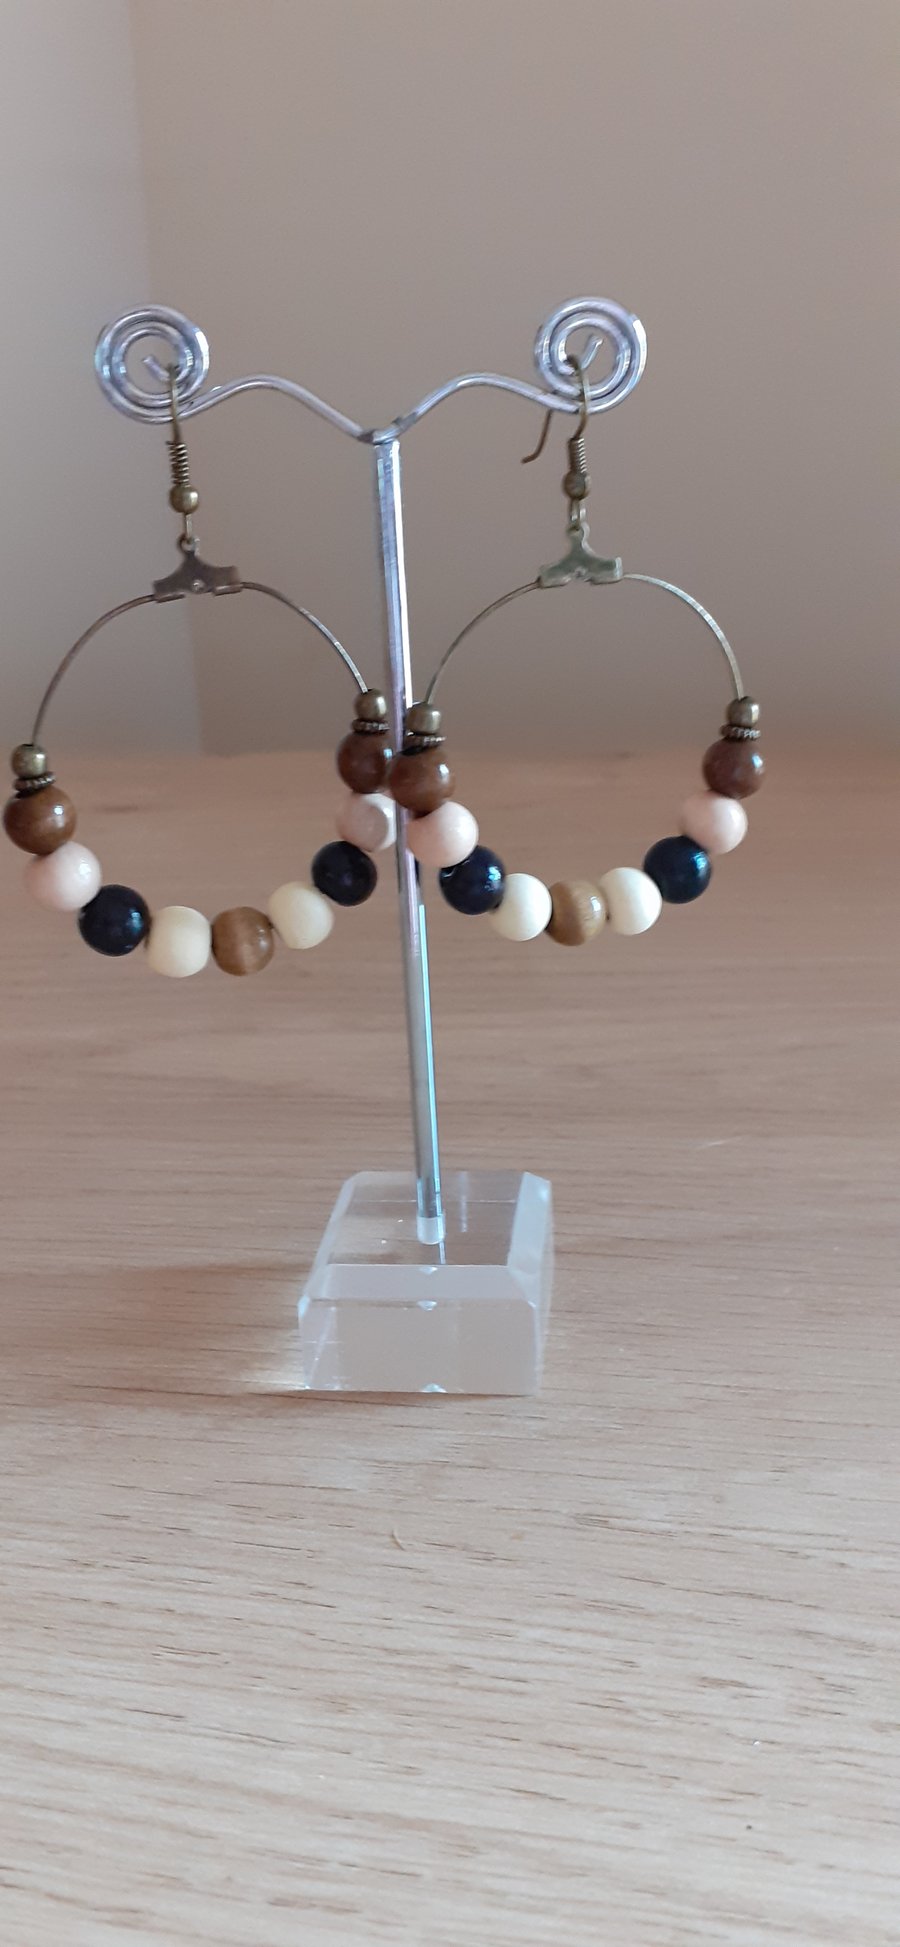 BOOHOO STYLE HOOP EARRINGS - ANTIQUE BRONZE AND WOODEN BEADS.